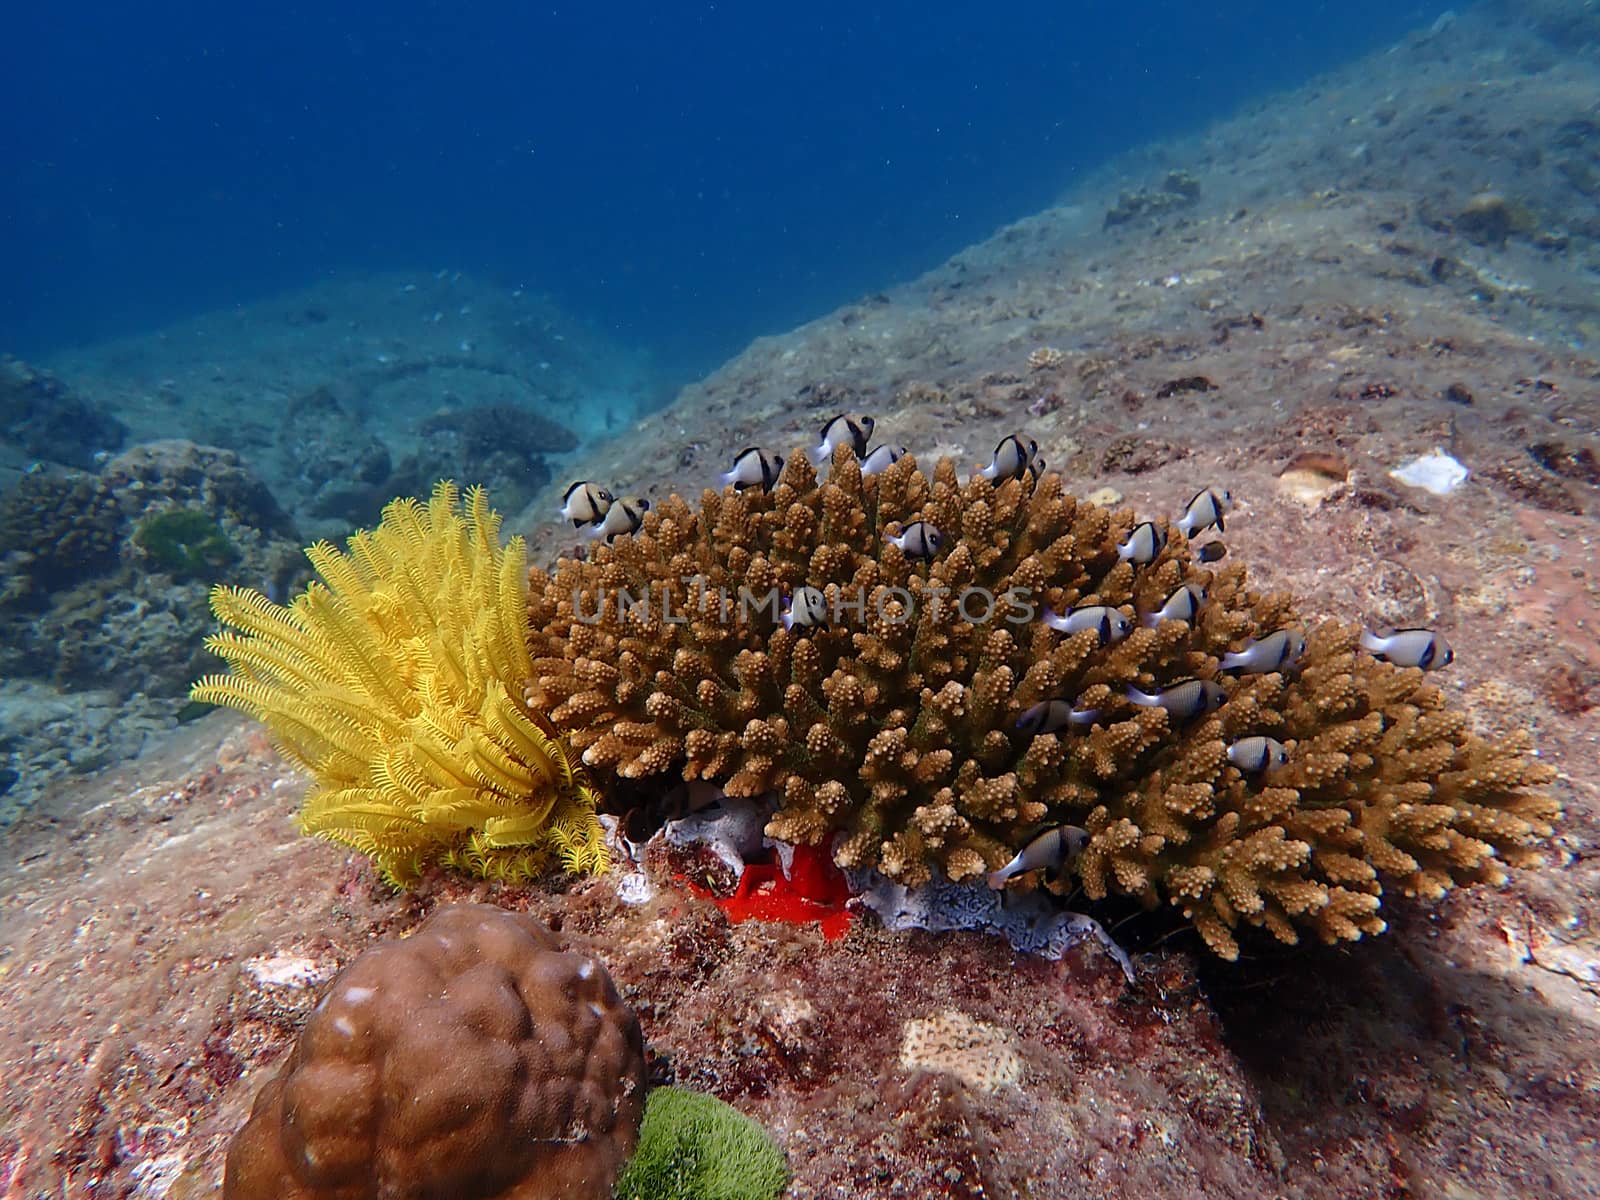 Fish and corals under blue sea, diving activity, underwater photography